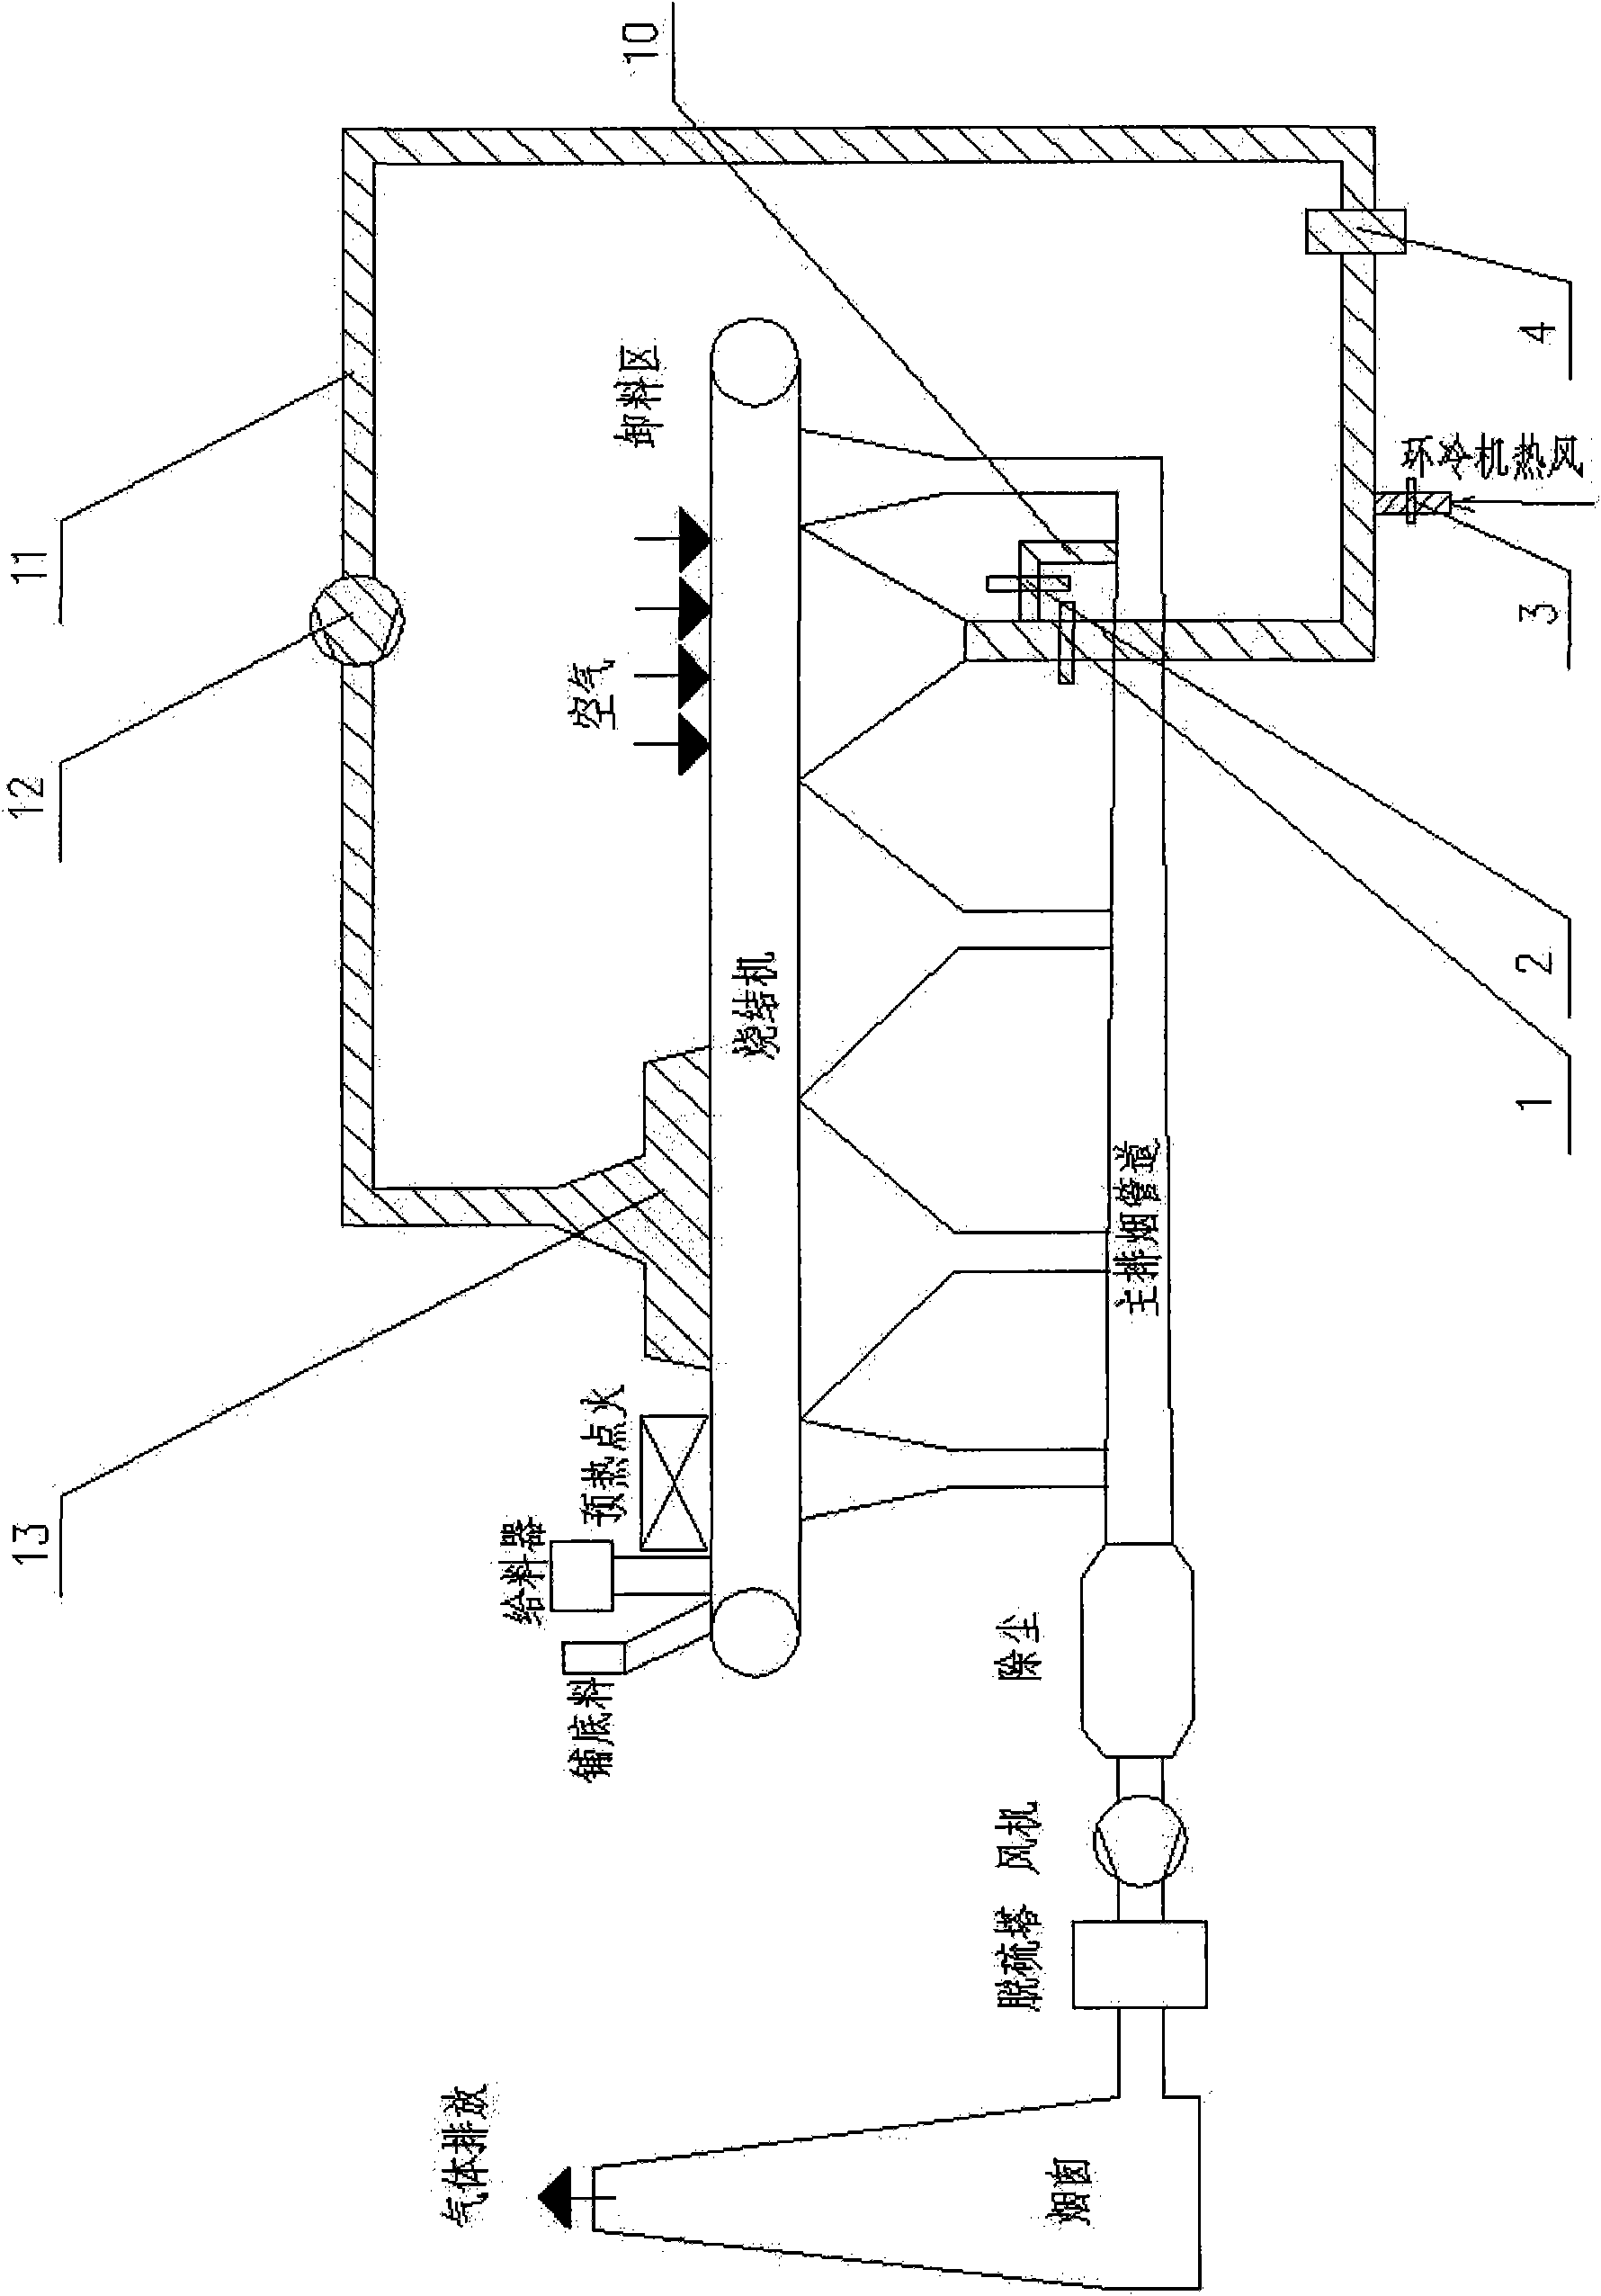 Negative energy consumption dioxin emission reducing system of sintering machine and method thereof